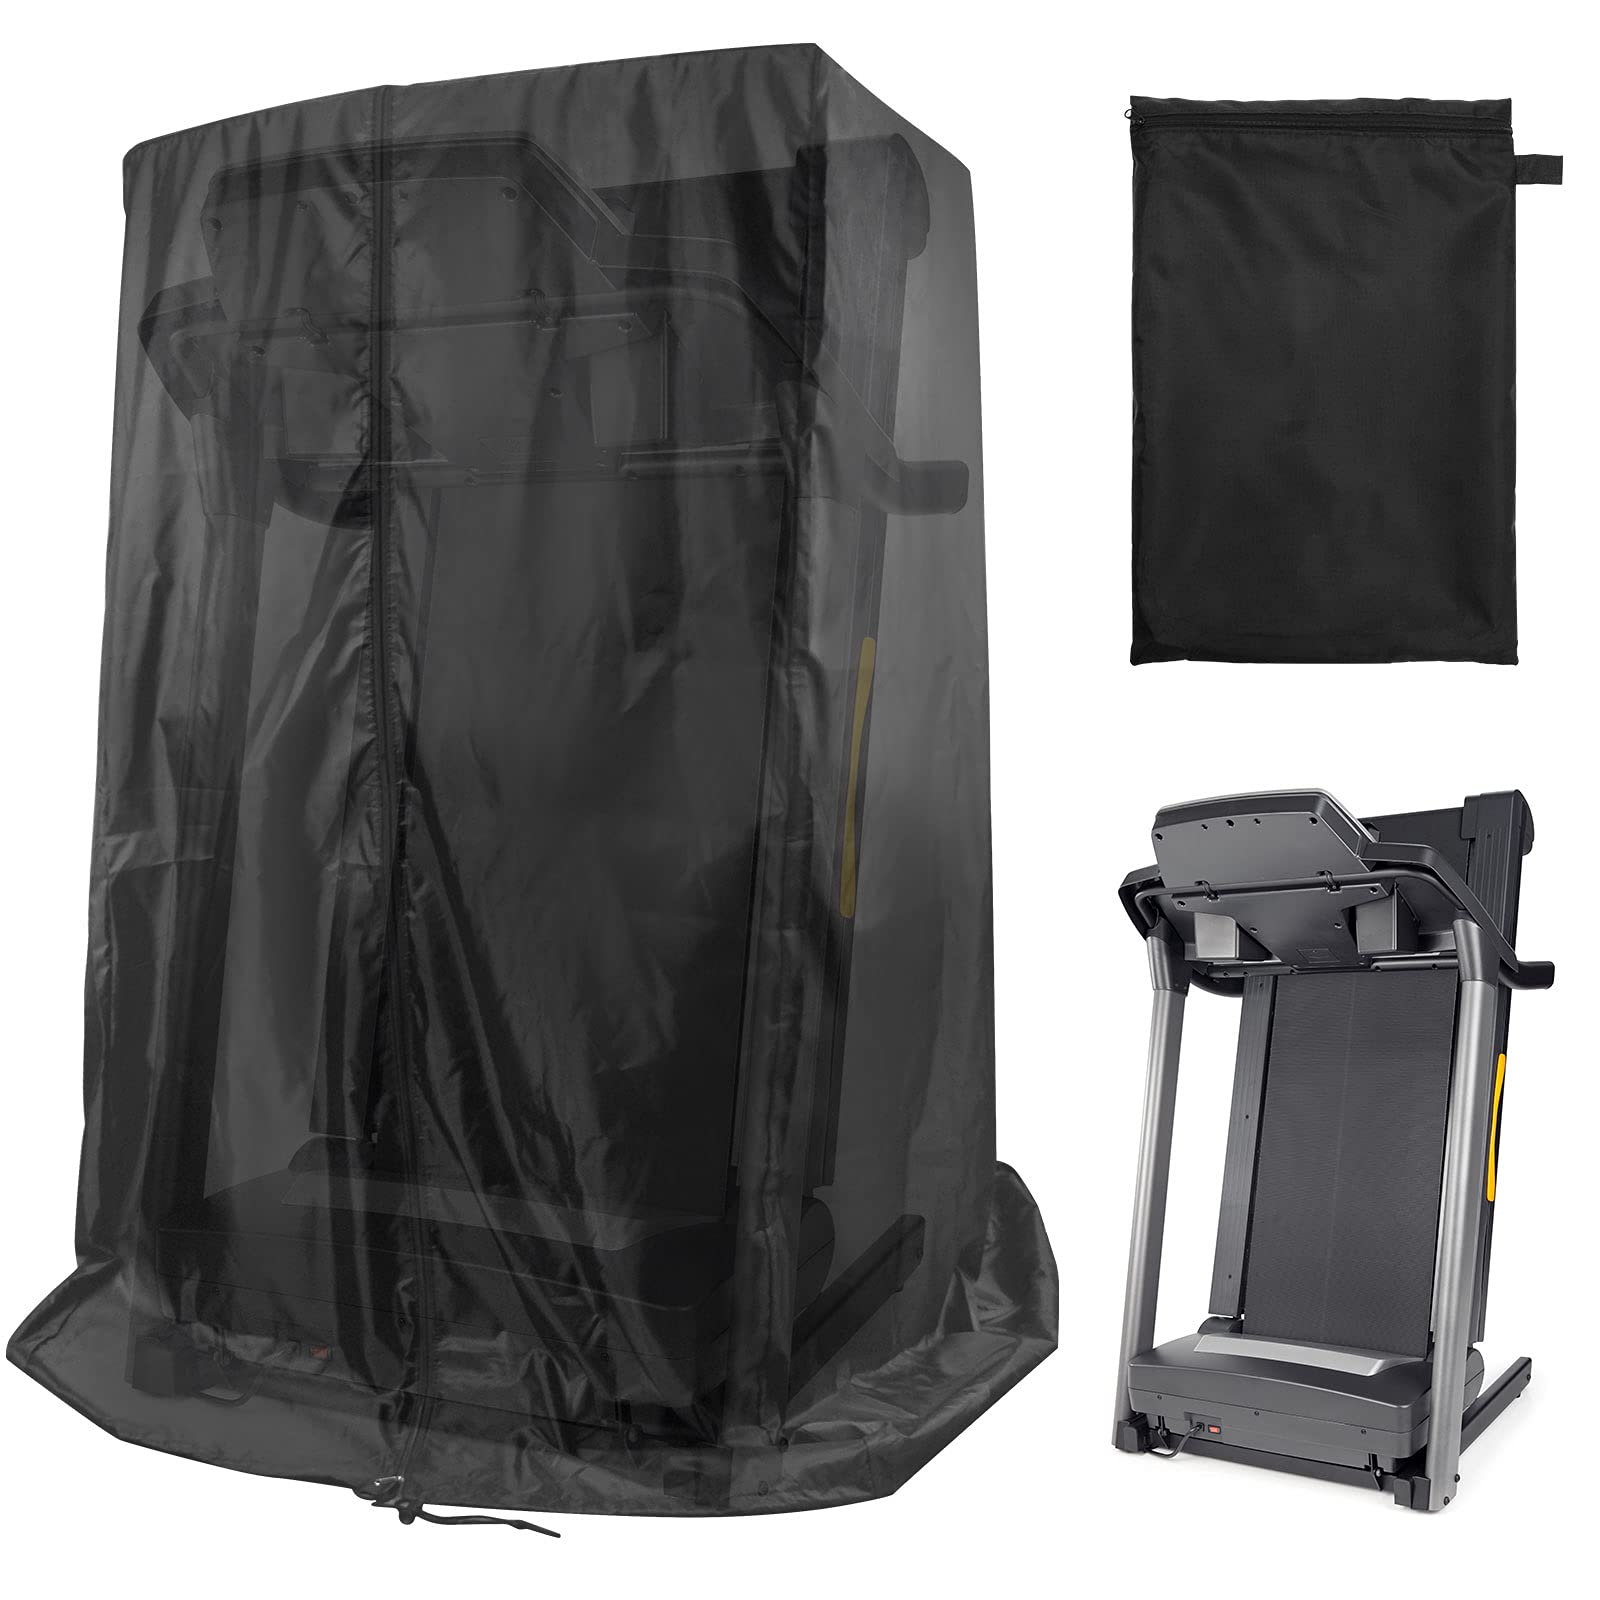 Luxiv Black Treadmill cover 46 L x 38 W x 66 H, Luxiv Dustproof Waterproof cover for Treadmill Fold-able cover for Indoor Outdoor Suns